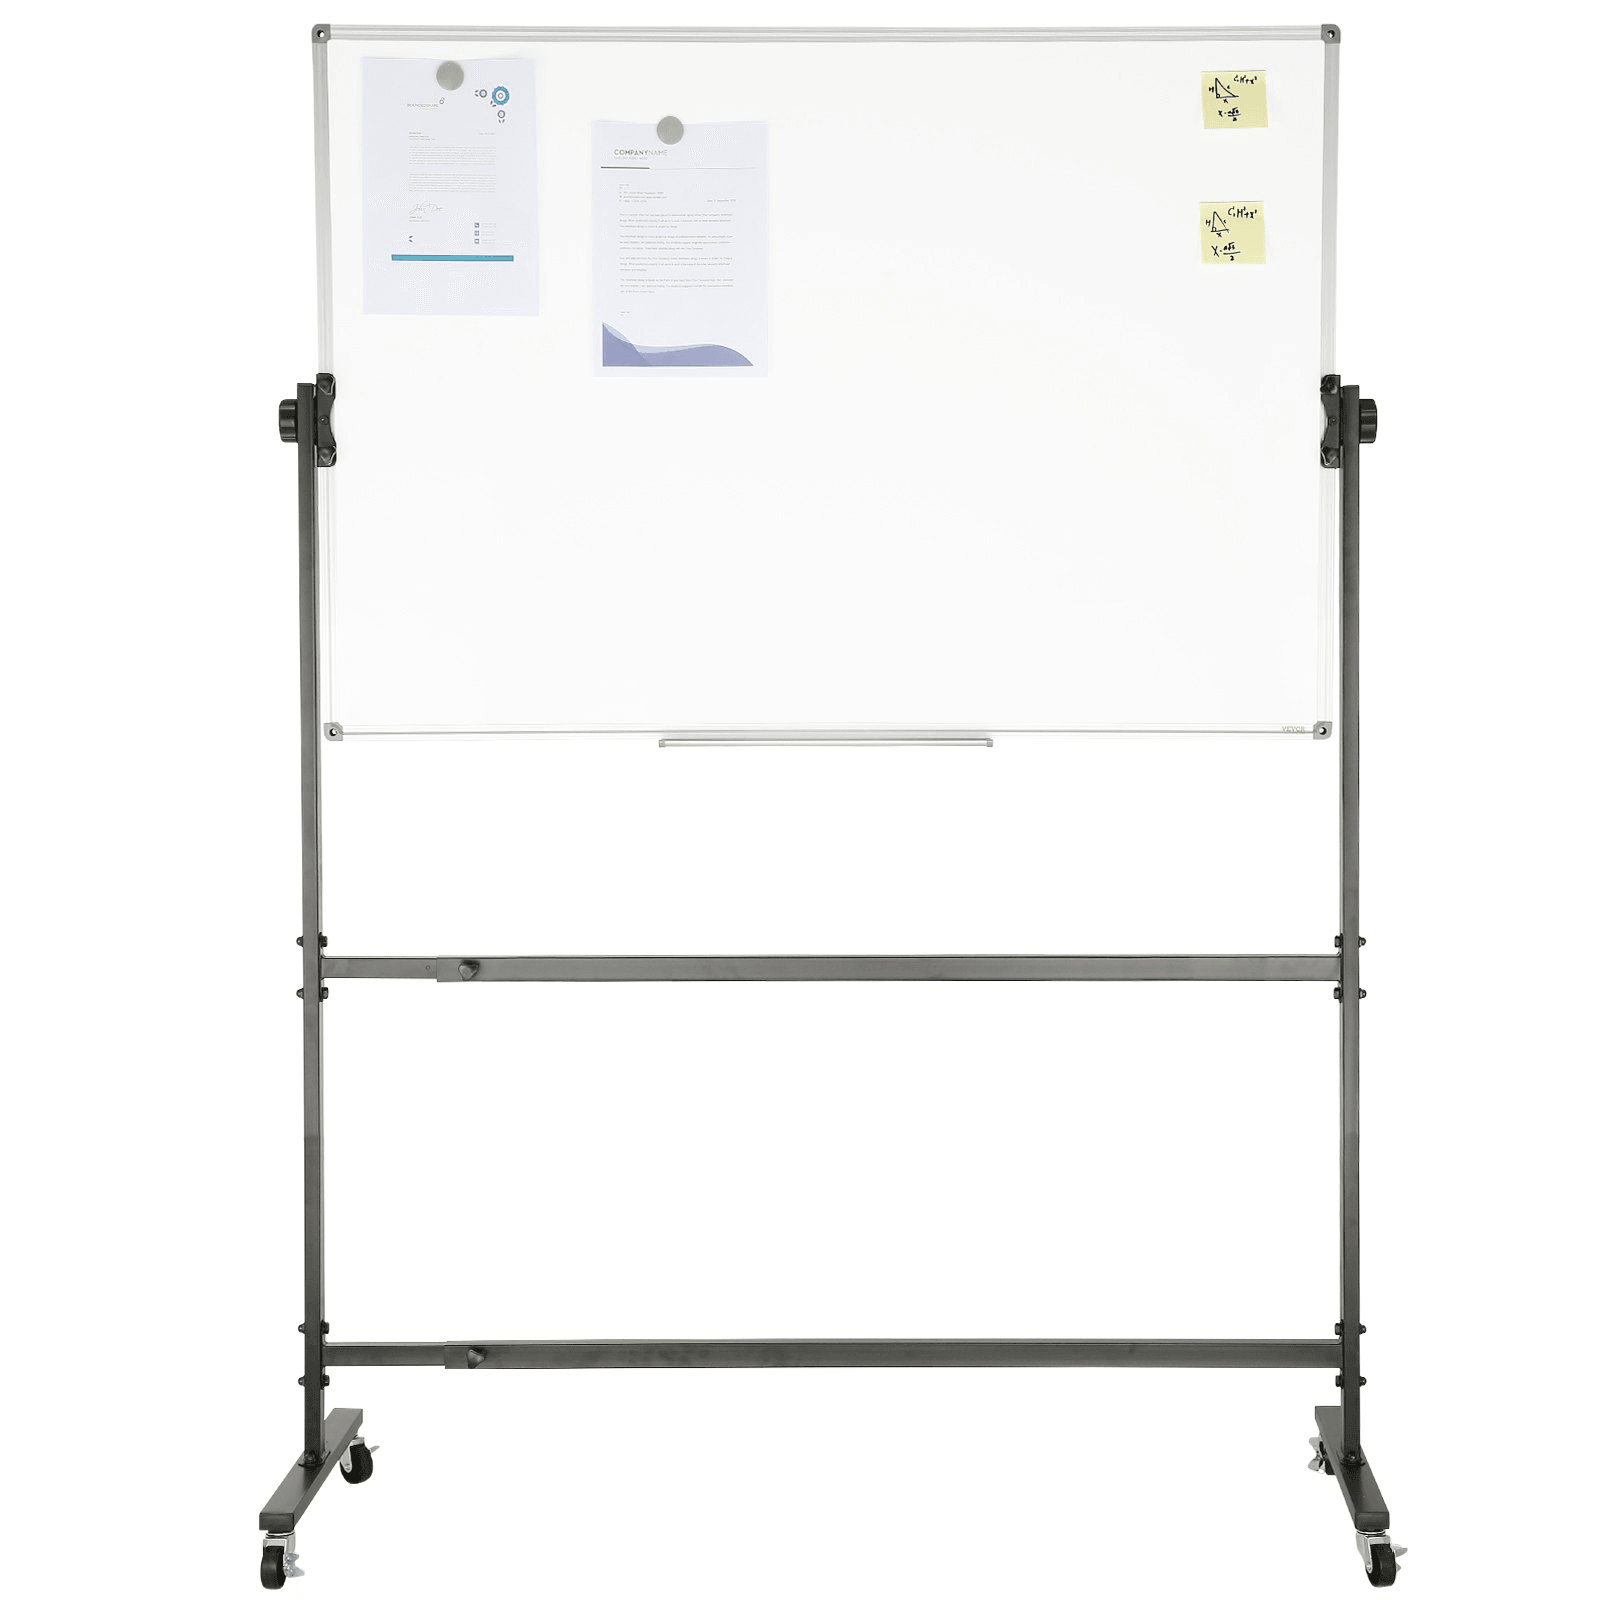 VEVOR Rolling Whiteboard, 48x32 inch Double-Sided Magnetic Mobile Whiteboard, 360° Reversible Adjustable Height Dry Erase Board with Wheels & Movable Tray for Office School - Loomini